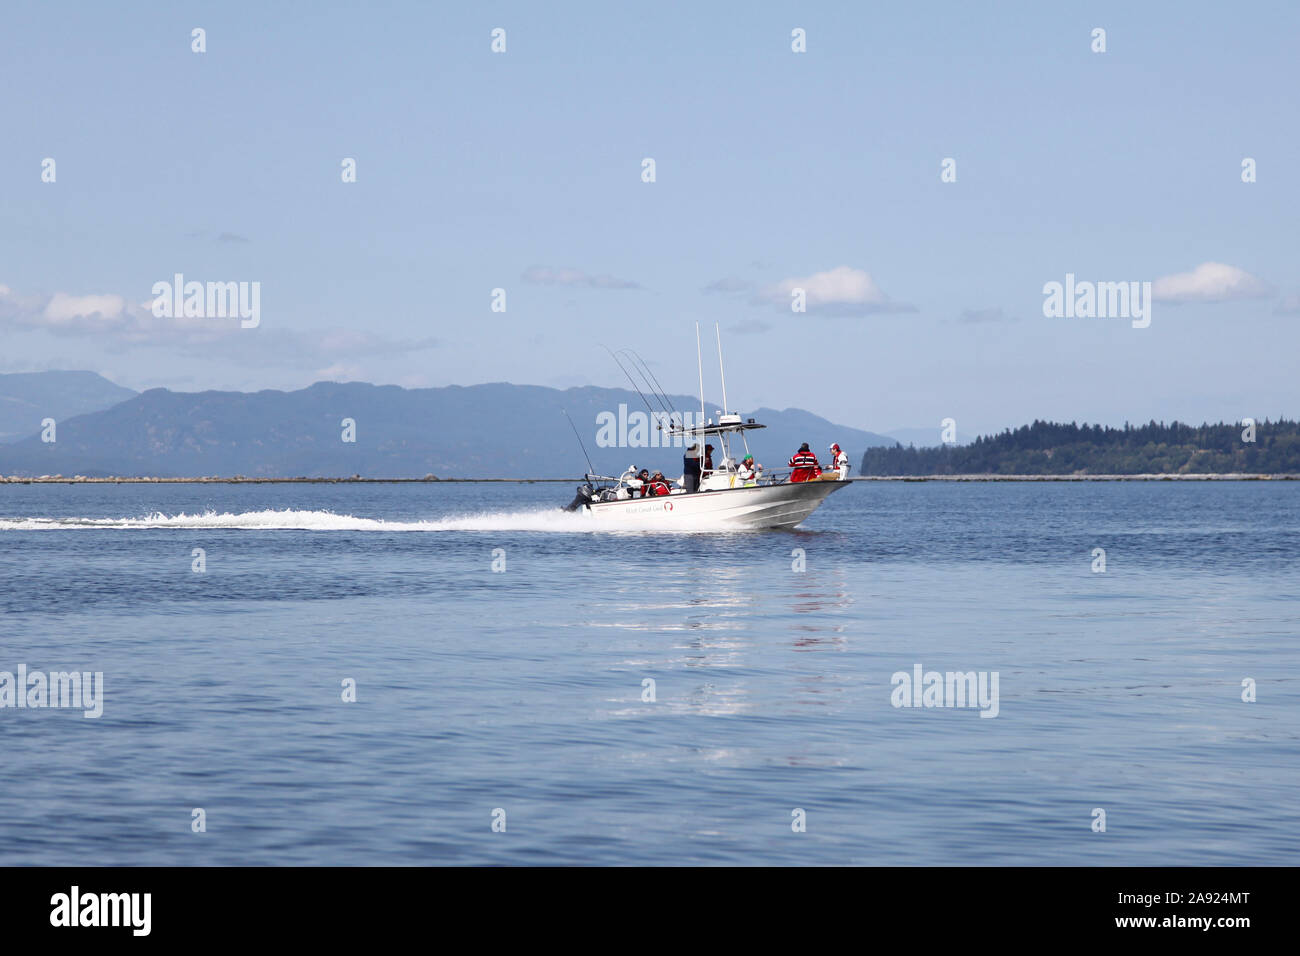 A Boston Whaler pleasure fishing boat 'West Coast Girl' speeds along the Campbell River, Vancouver, British Columbia, Canada, 2016 with copy space Stock Photo